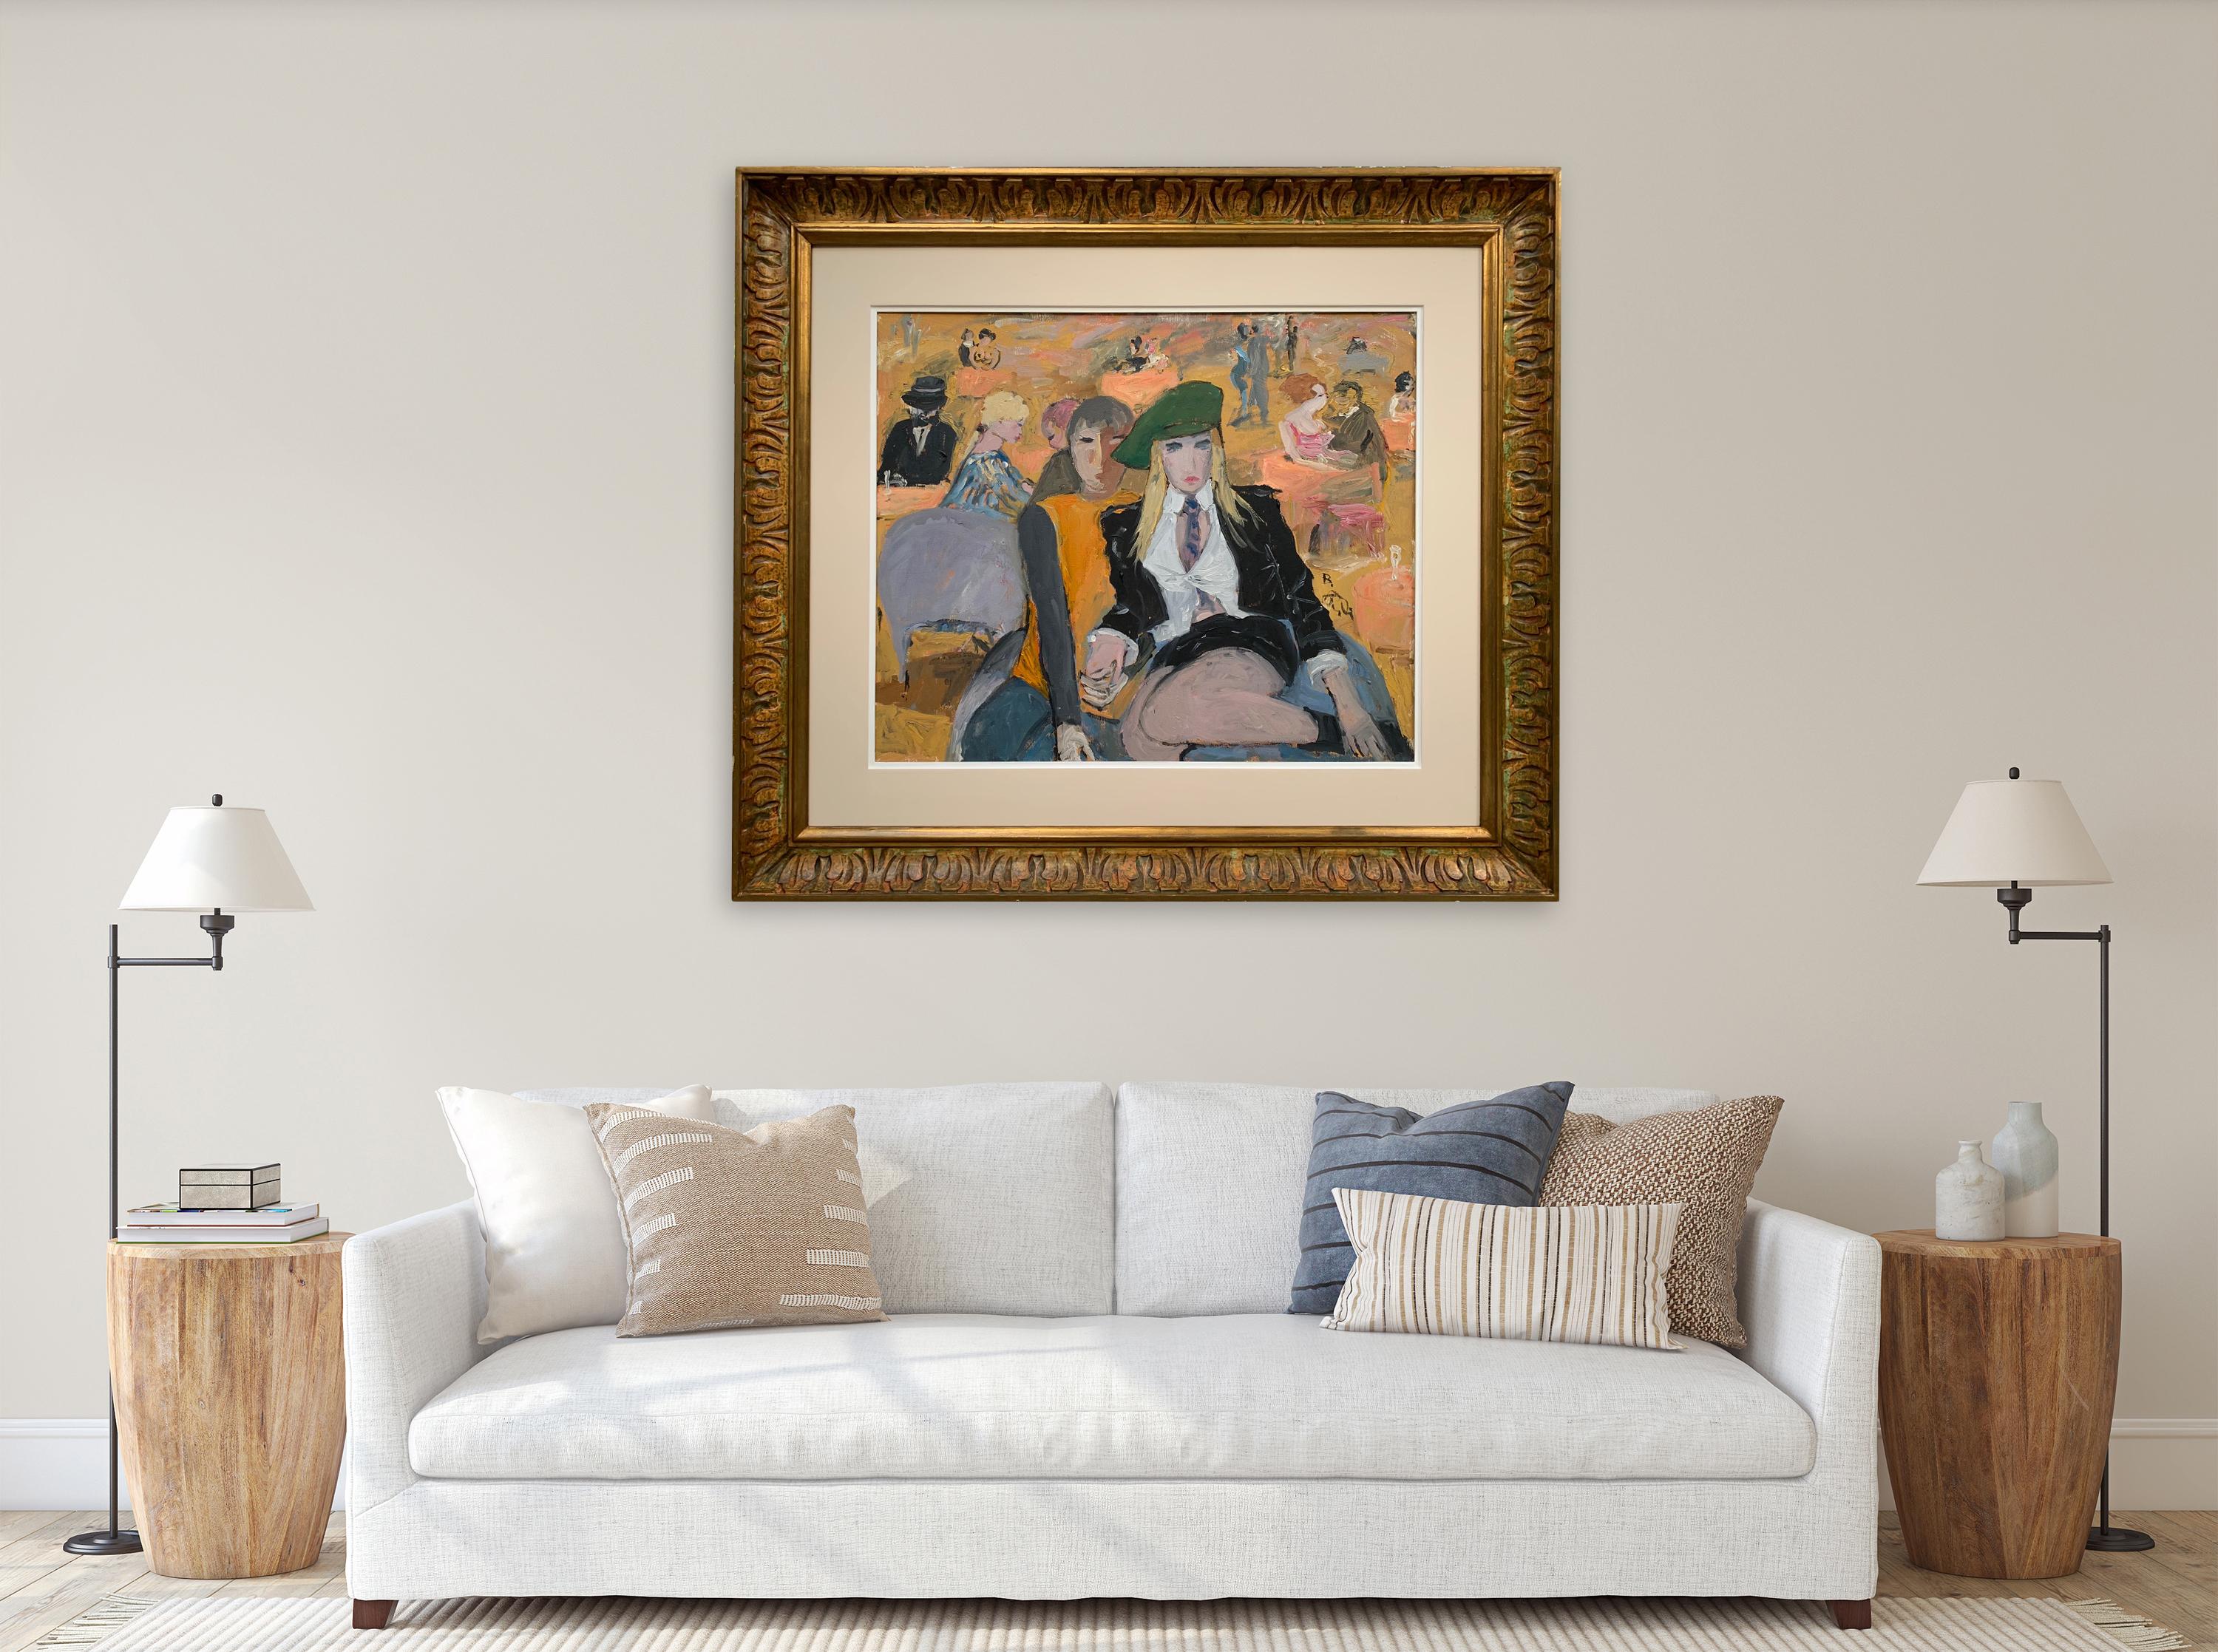 Historical Center In Santa Croce By Bruno Paoli - Figurative Painting For Sale 2